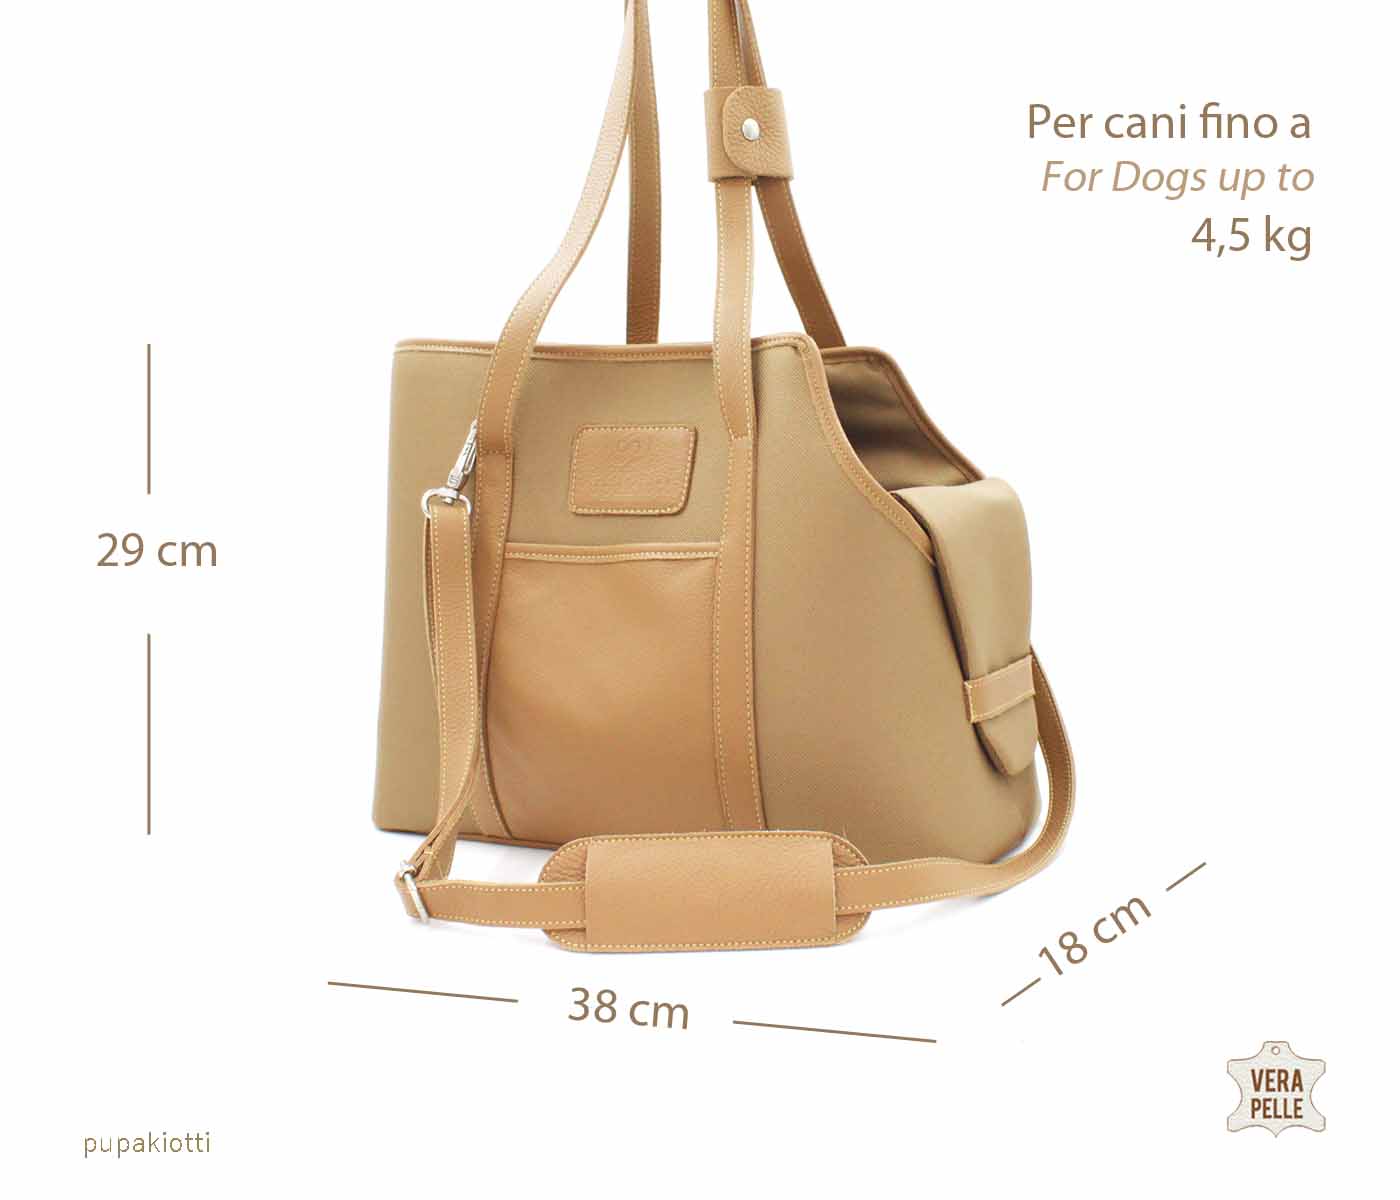 MARA. Carrying Bag made with Genuine Leather and technical waterproof fabric